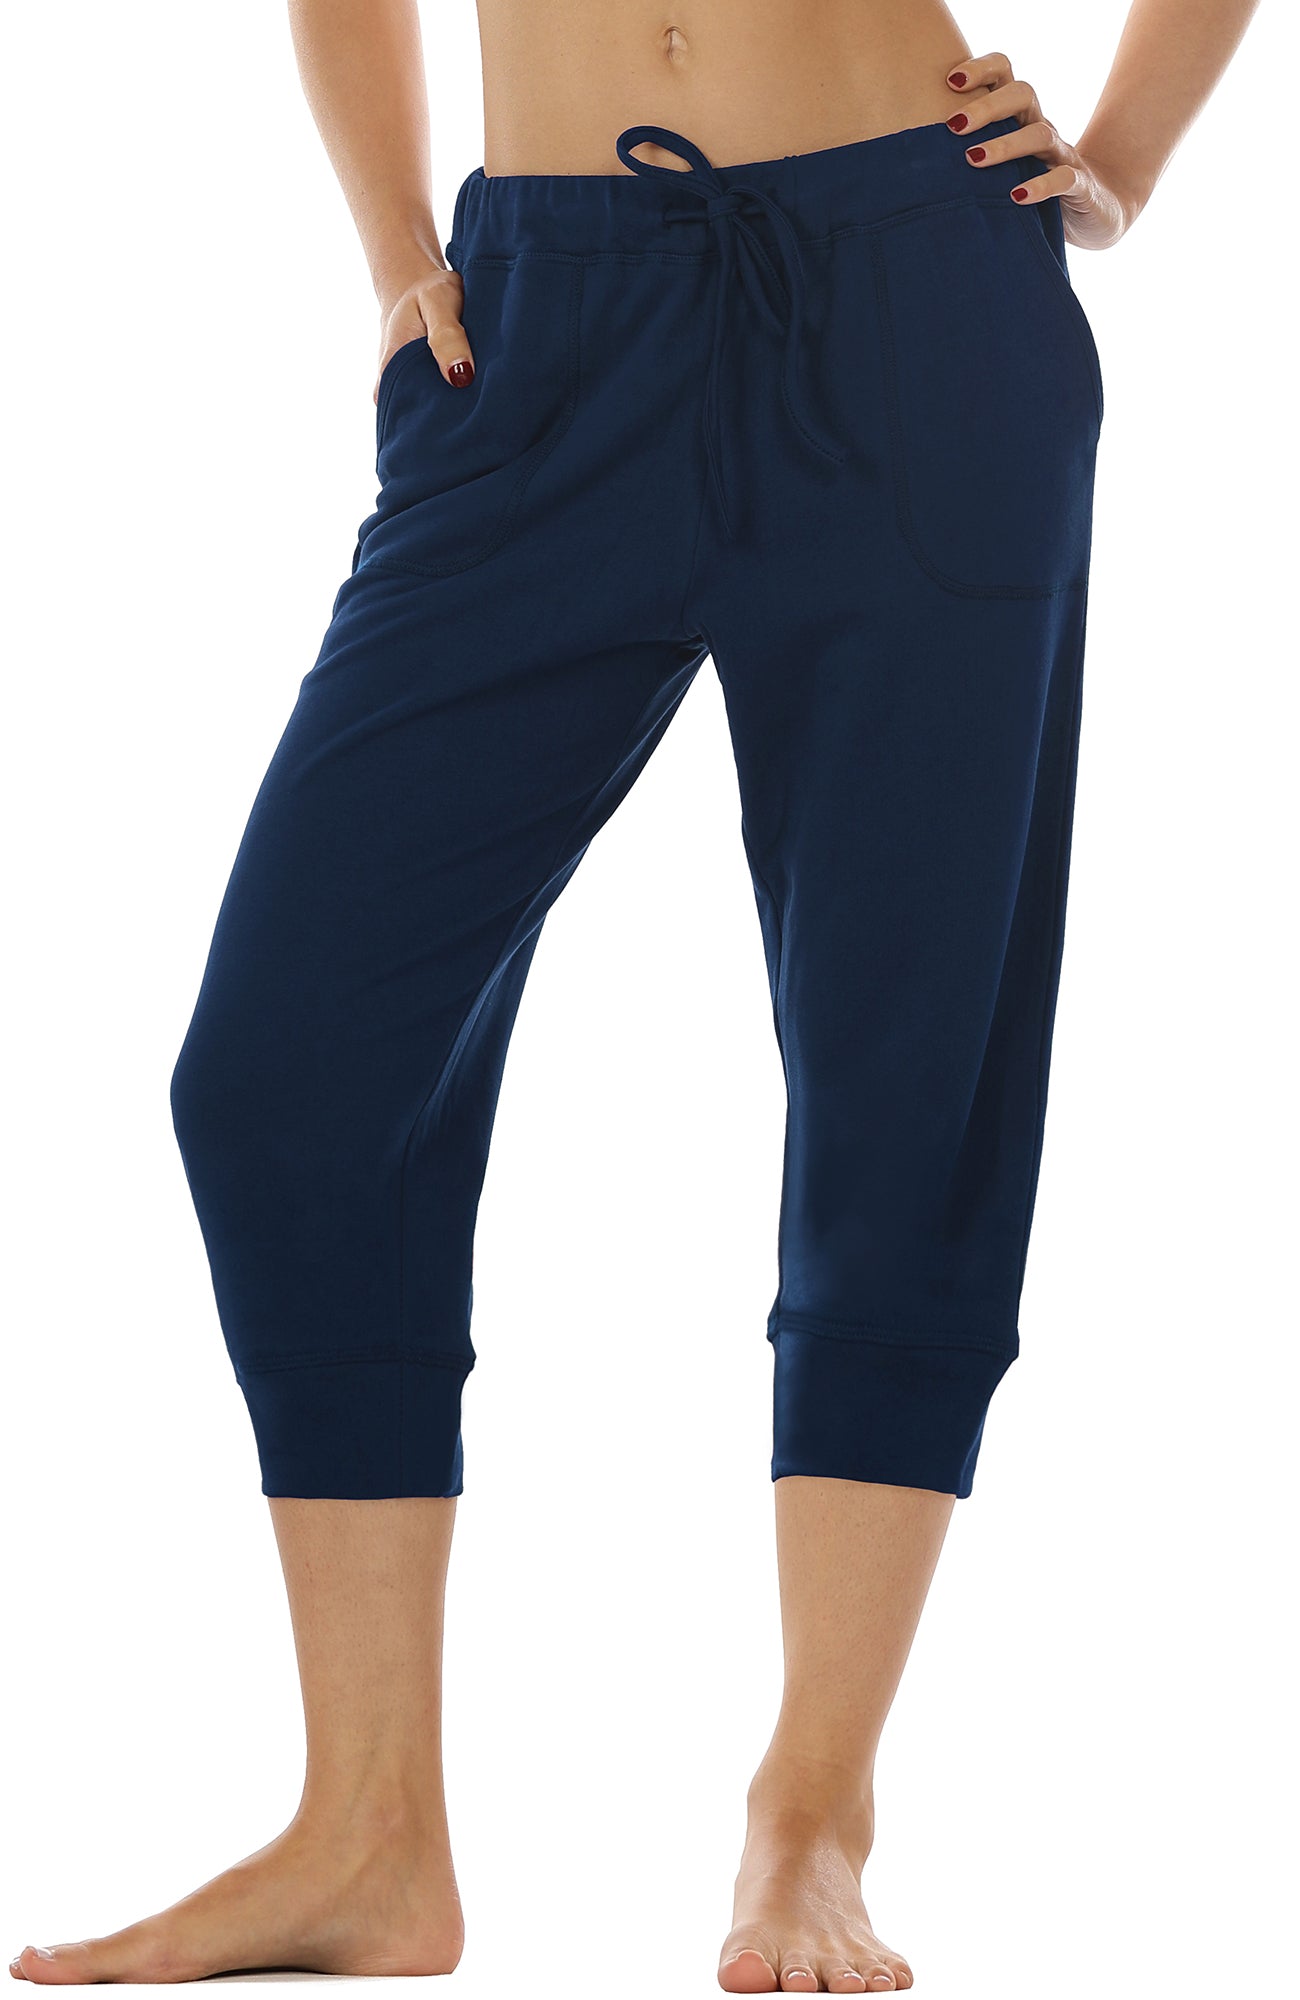 SPECIAL MAGIC Women’s Capri Sweatpants Jogger Cargo Pants with Pockets for  both Sports and Casual Wear(Steel Blue S)